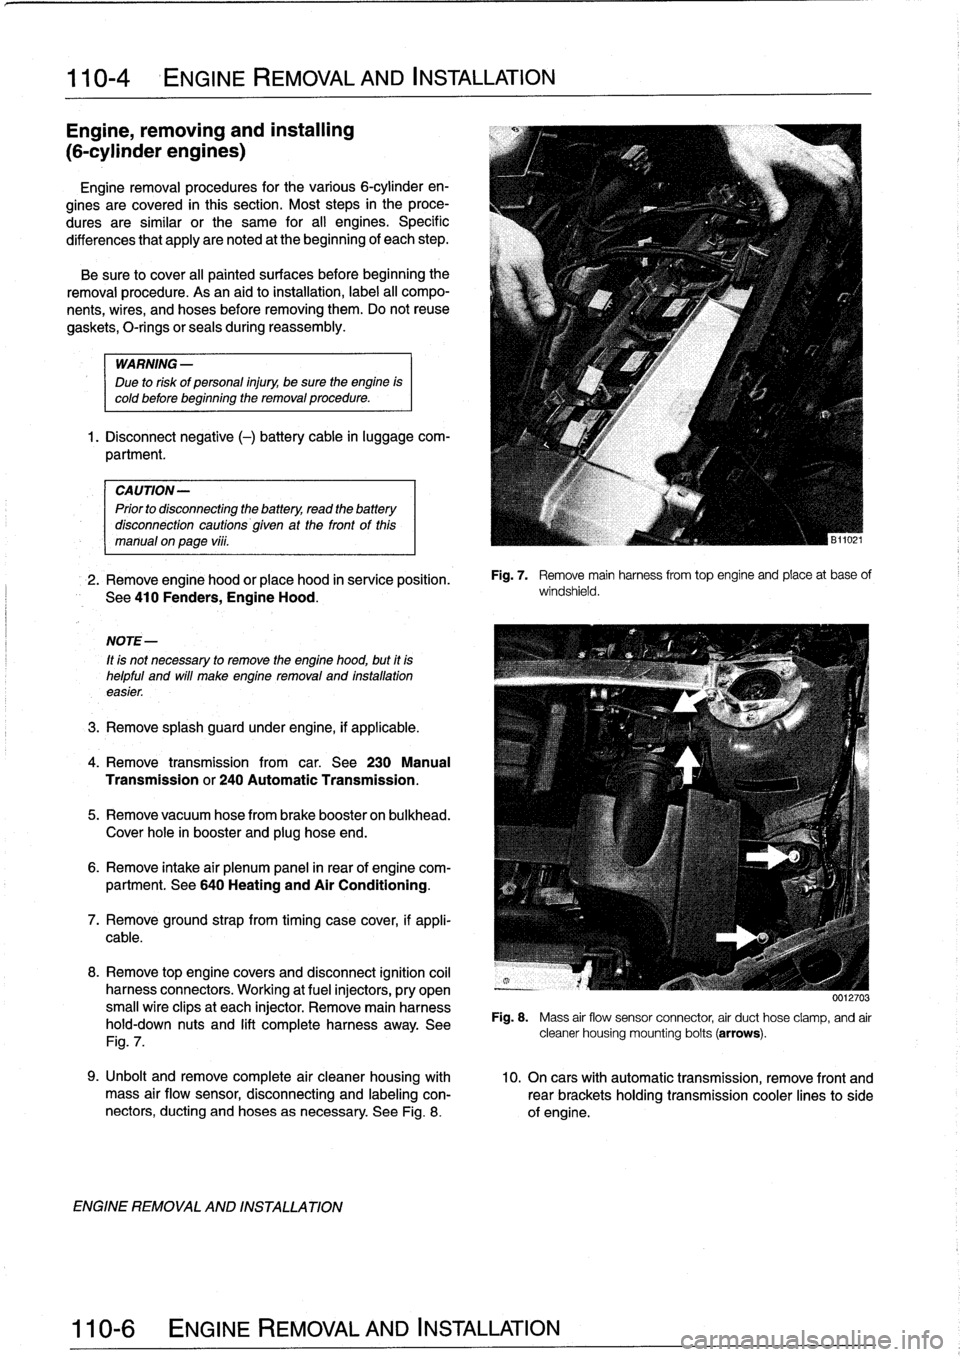 BMW 325i 1998 E36 Workshop Manual 
110-
4

	

ENGINE
REMOVAL
AND
INSTALLATION

Engine,
removing
and
installing

(6-cylinder
engines)

Engineremoval
procedures
for
the
various
6-cylinder
en-

gines
arecovered
in
this
section
.
Most
ste